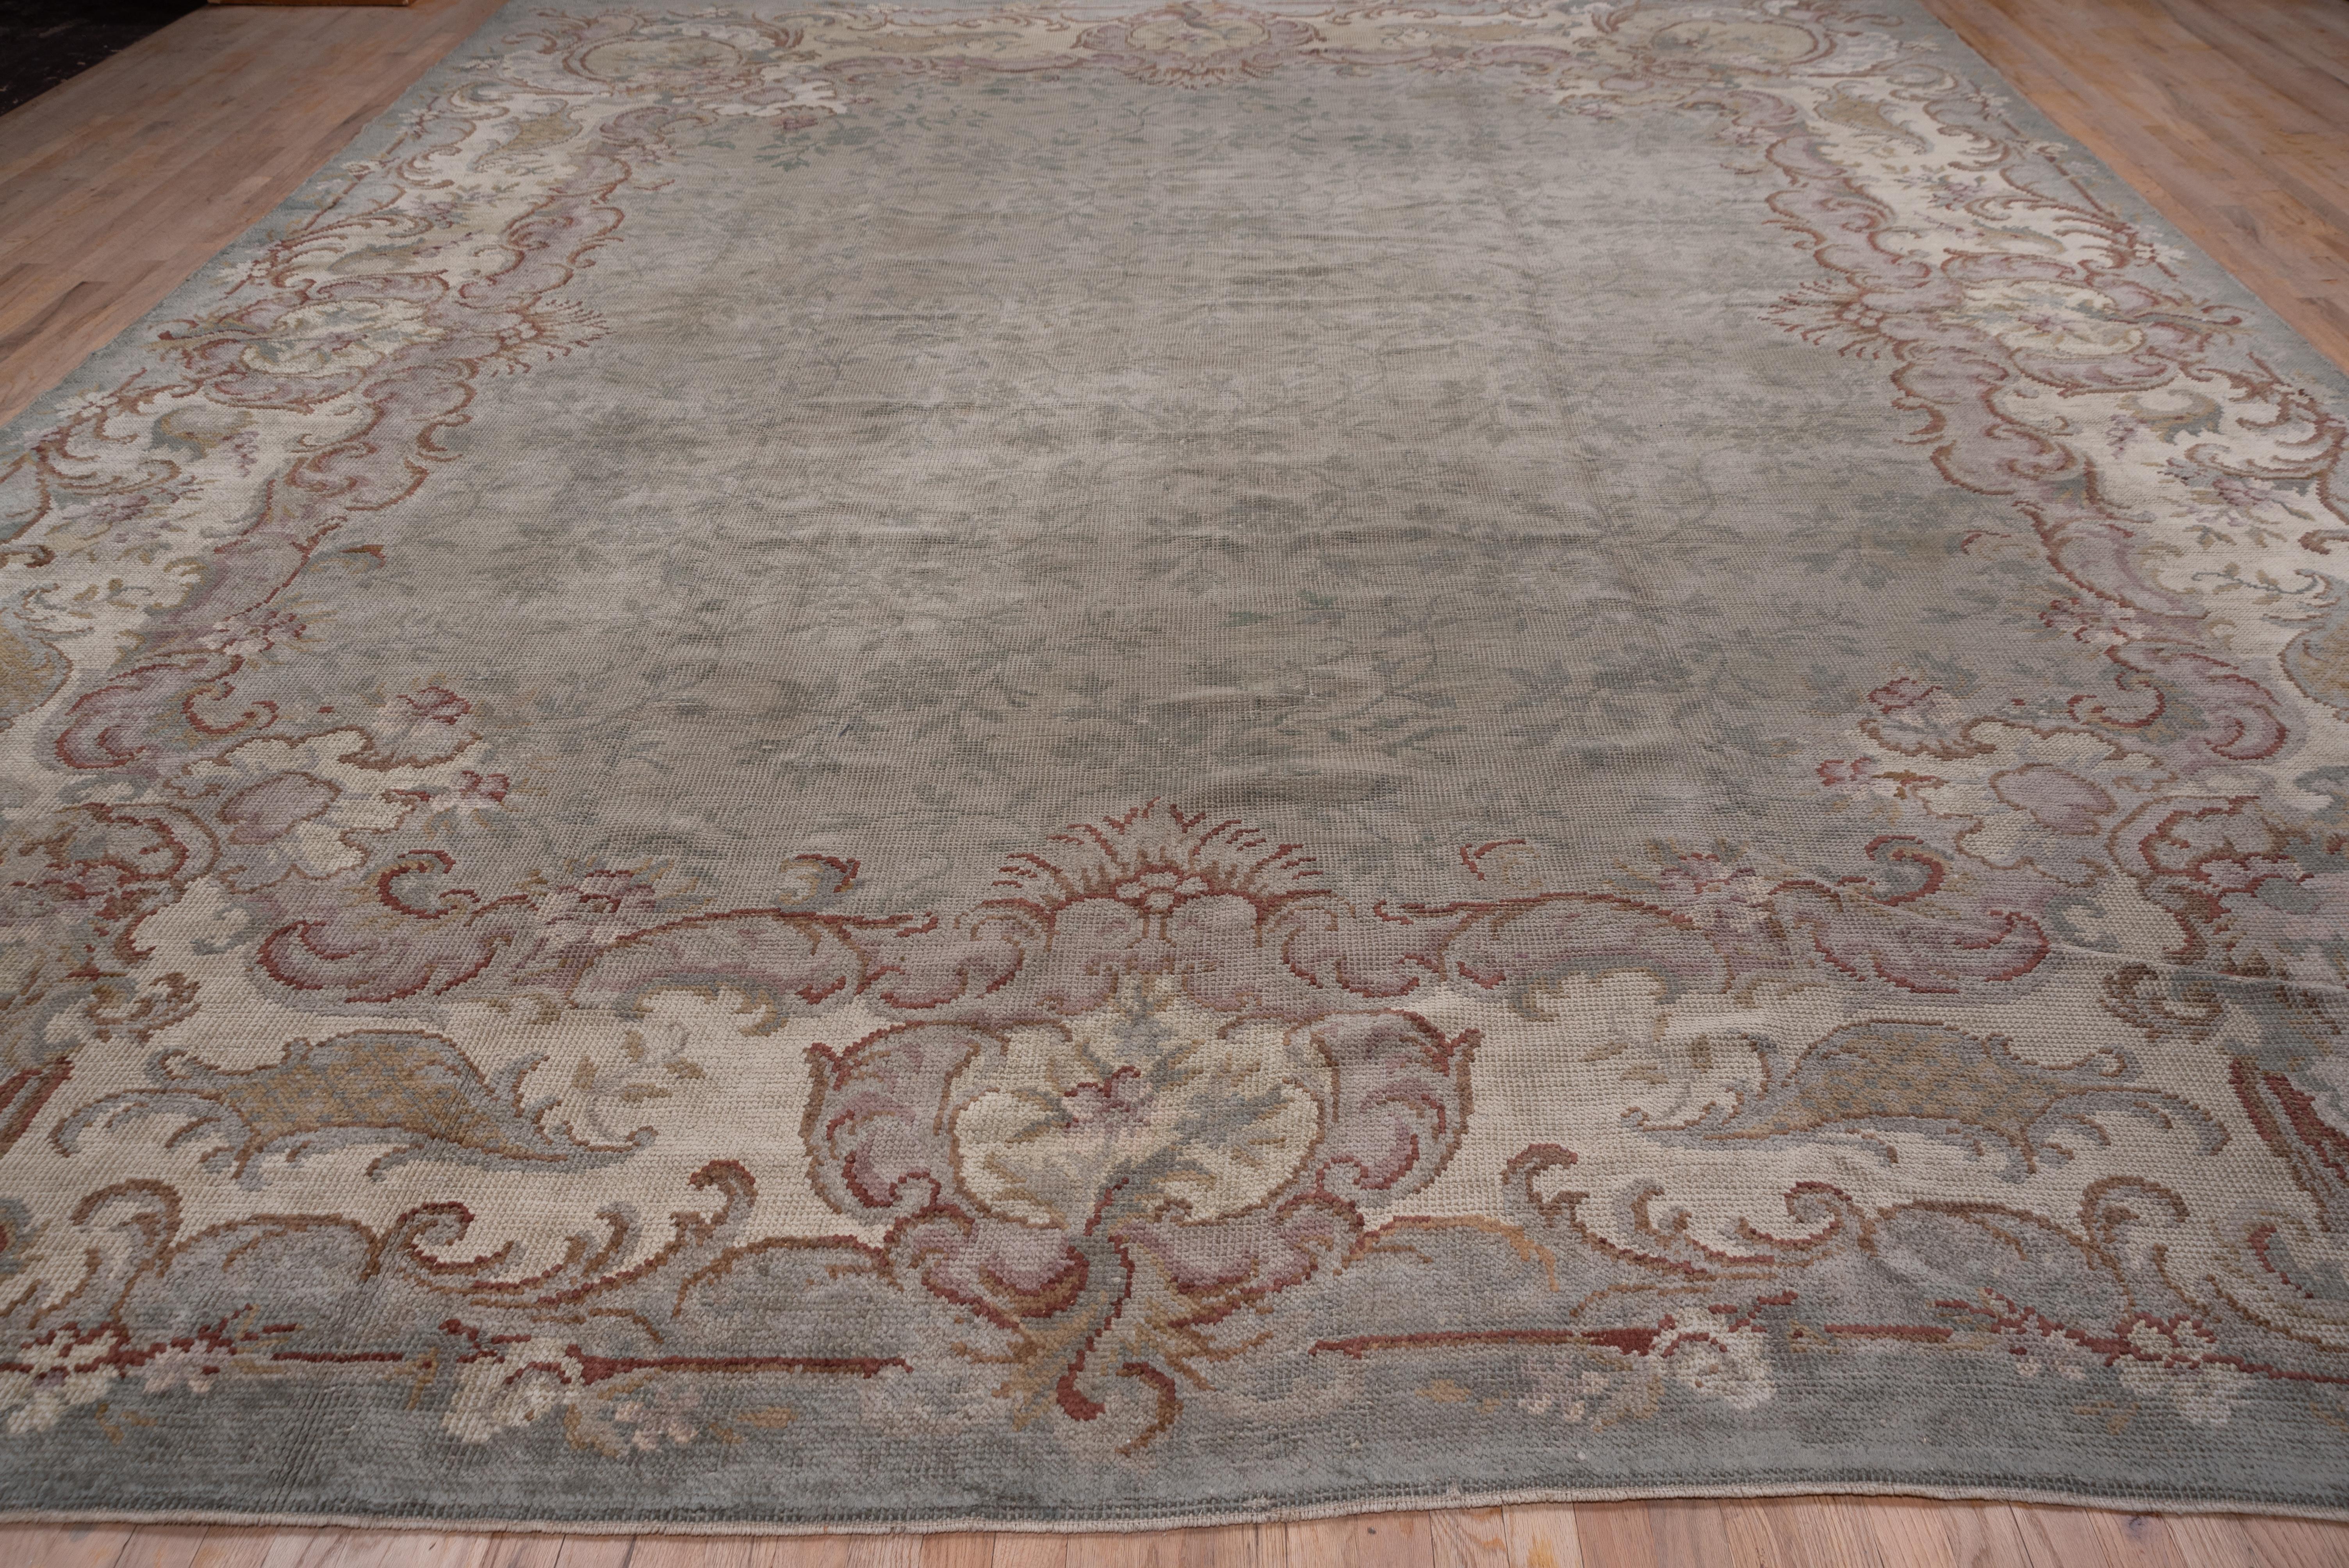 This antique French carpet presents a tone-on-tone stem, leaf and flower field pattern within a wide, bold Rococo border of acanthus leaves and scrolls. The light, but not exactly pastel palette includes light green, ivory, beige, reddish brown.